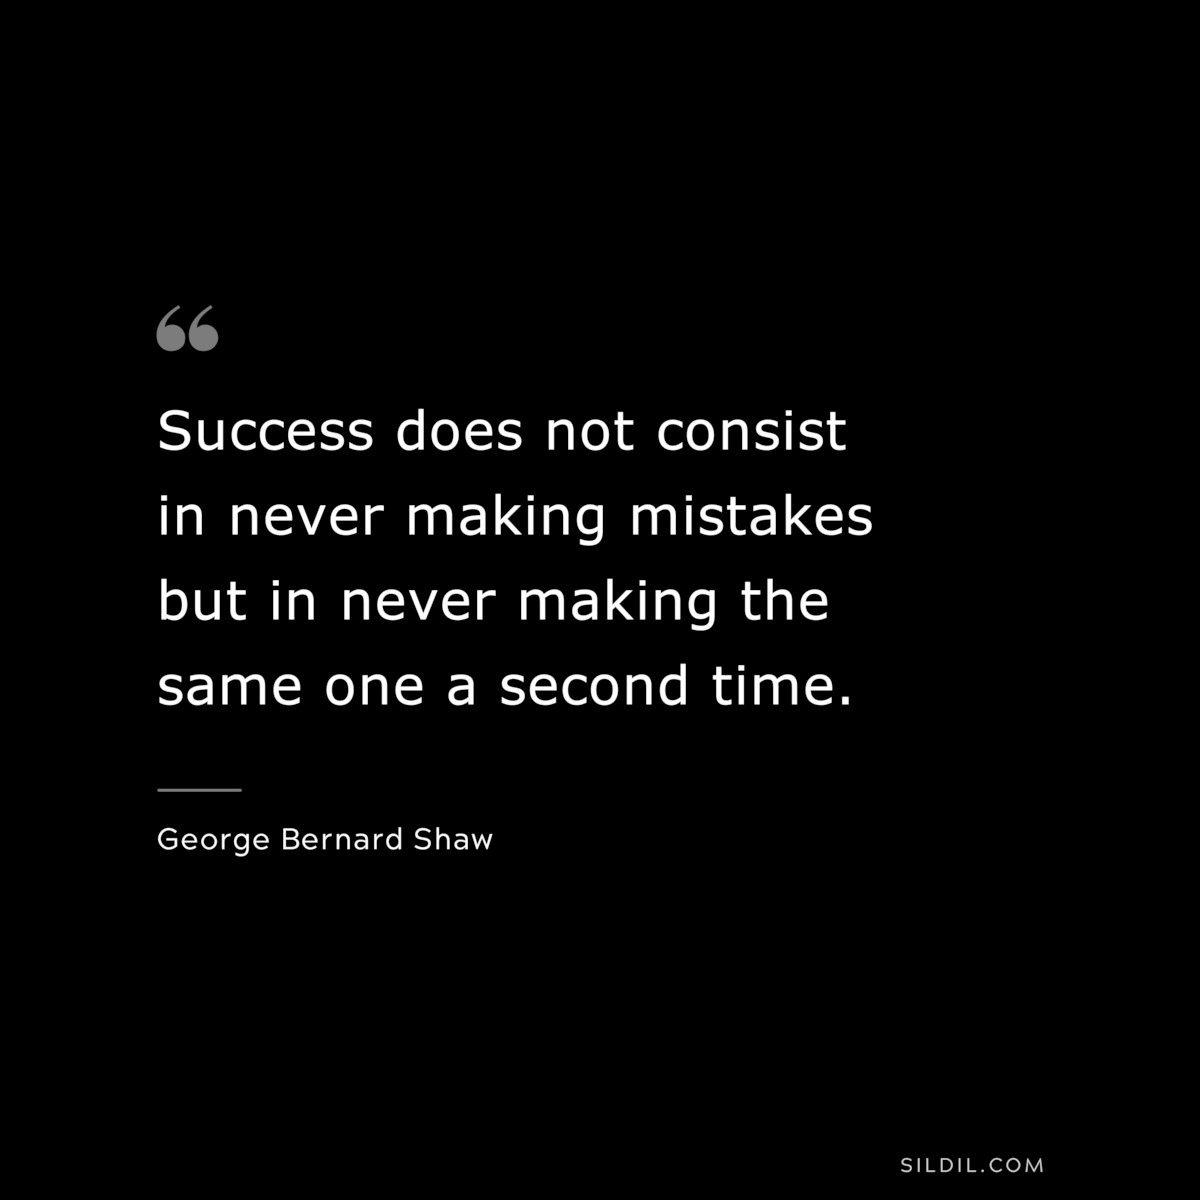 Success does not consist in never making mistakes but in never making the same one a second time. ― George Bernard Shaw